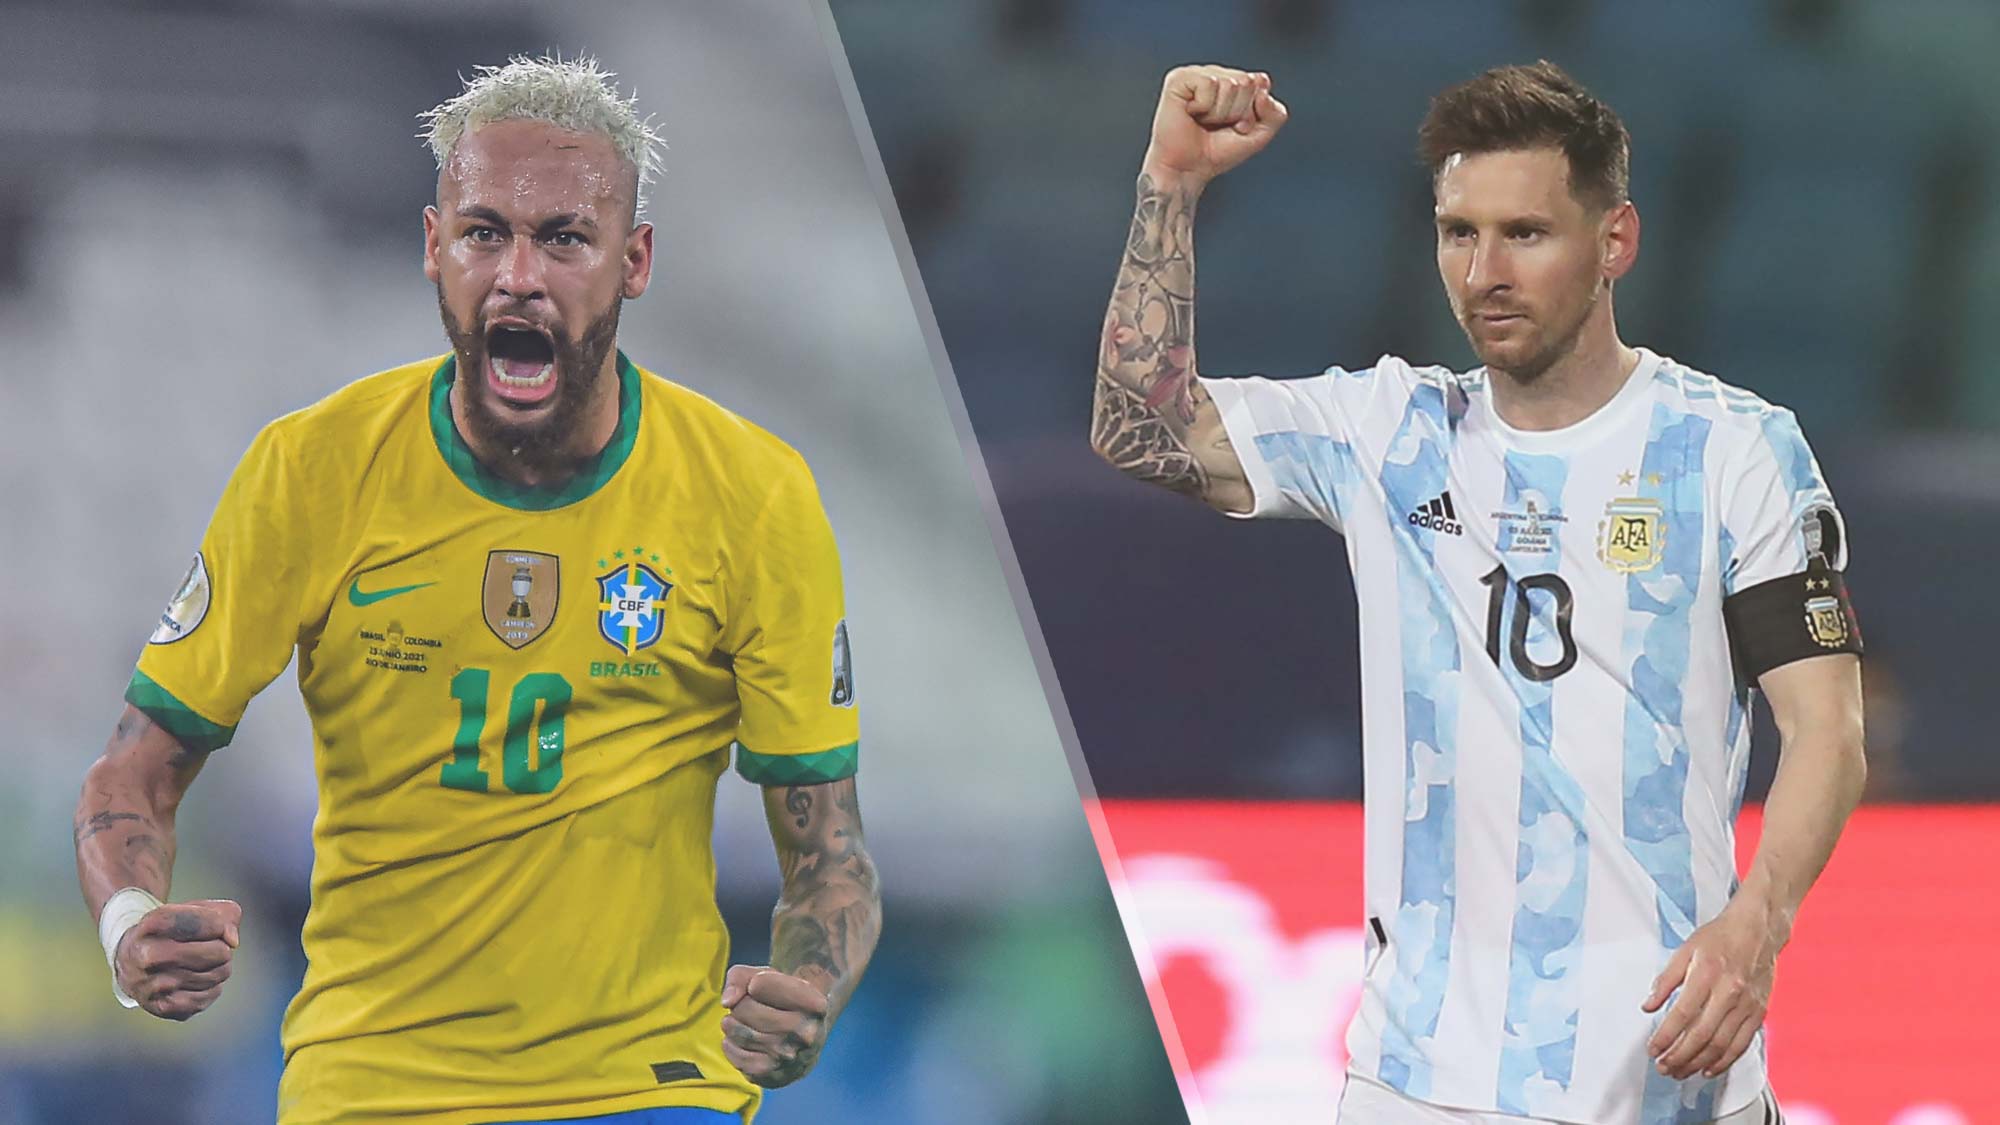 Brazil vs Argentina live stream — how to watch the Copa America final for free | Tom's Guide